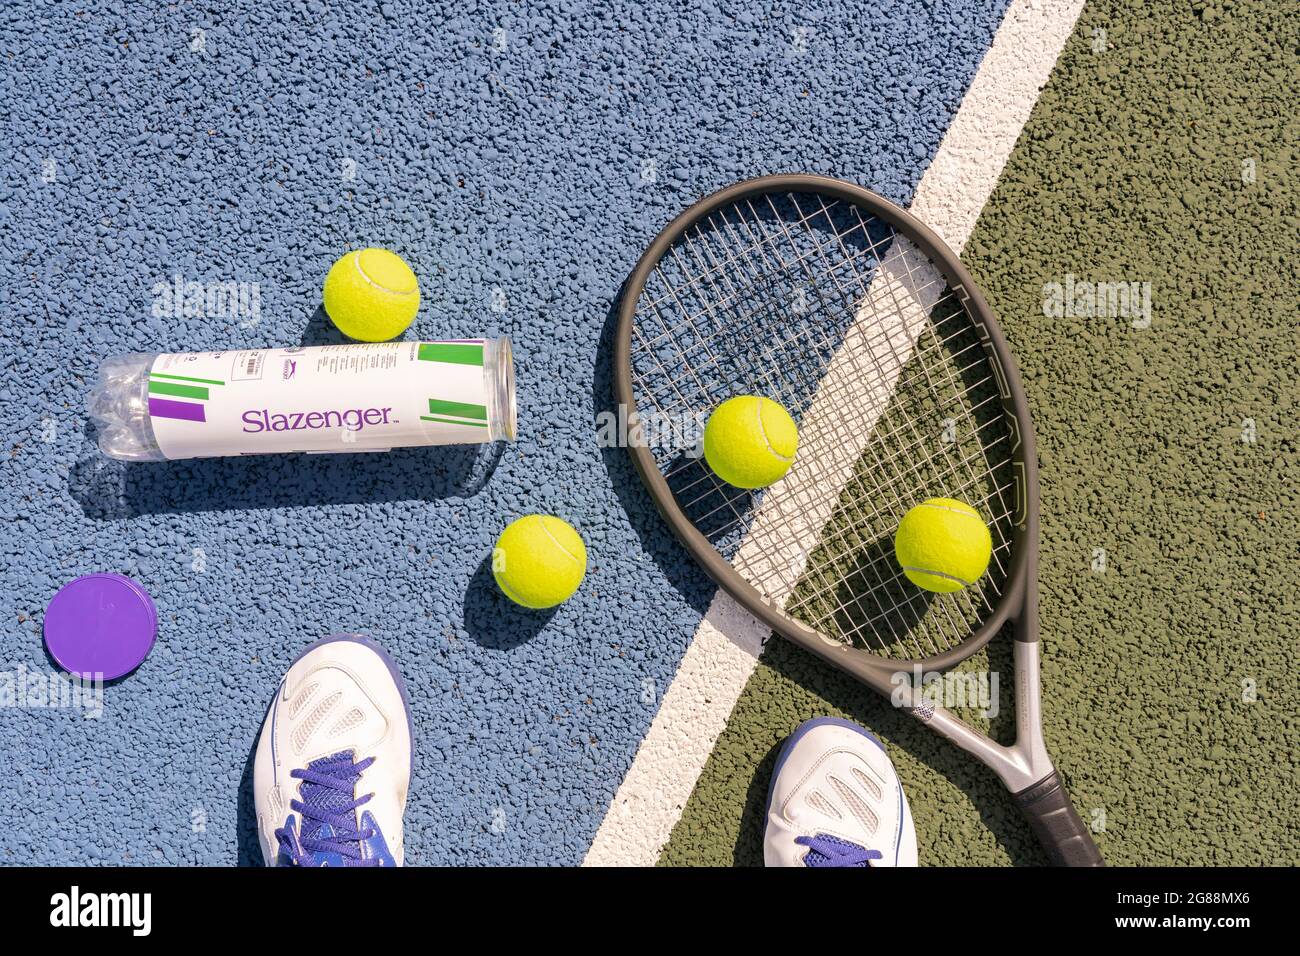 Looking down on a man's feet wearing trainers on a hard tennis court with a tennis racket and fluorescent yellow (optic yellow) tennis balls Stock Photo